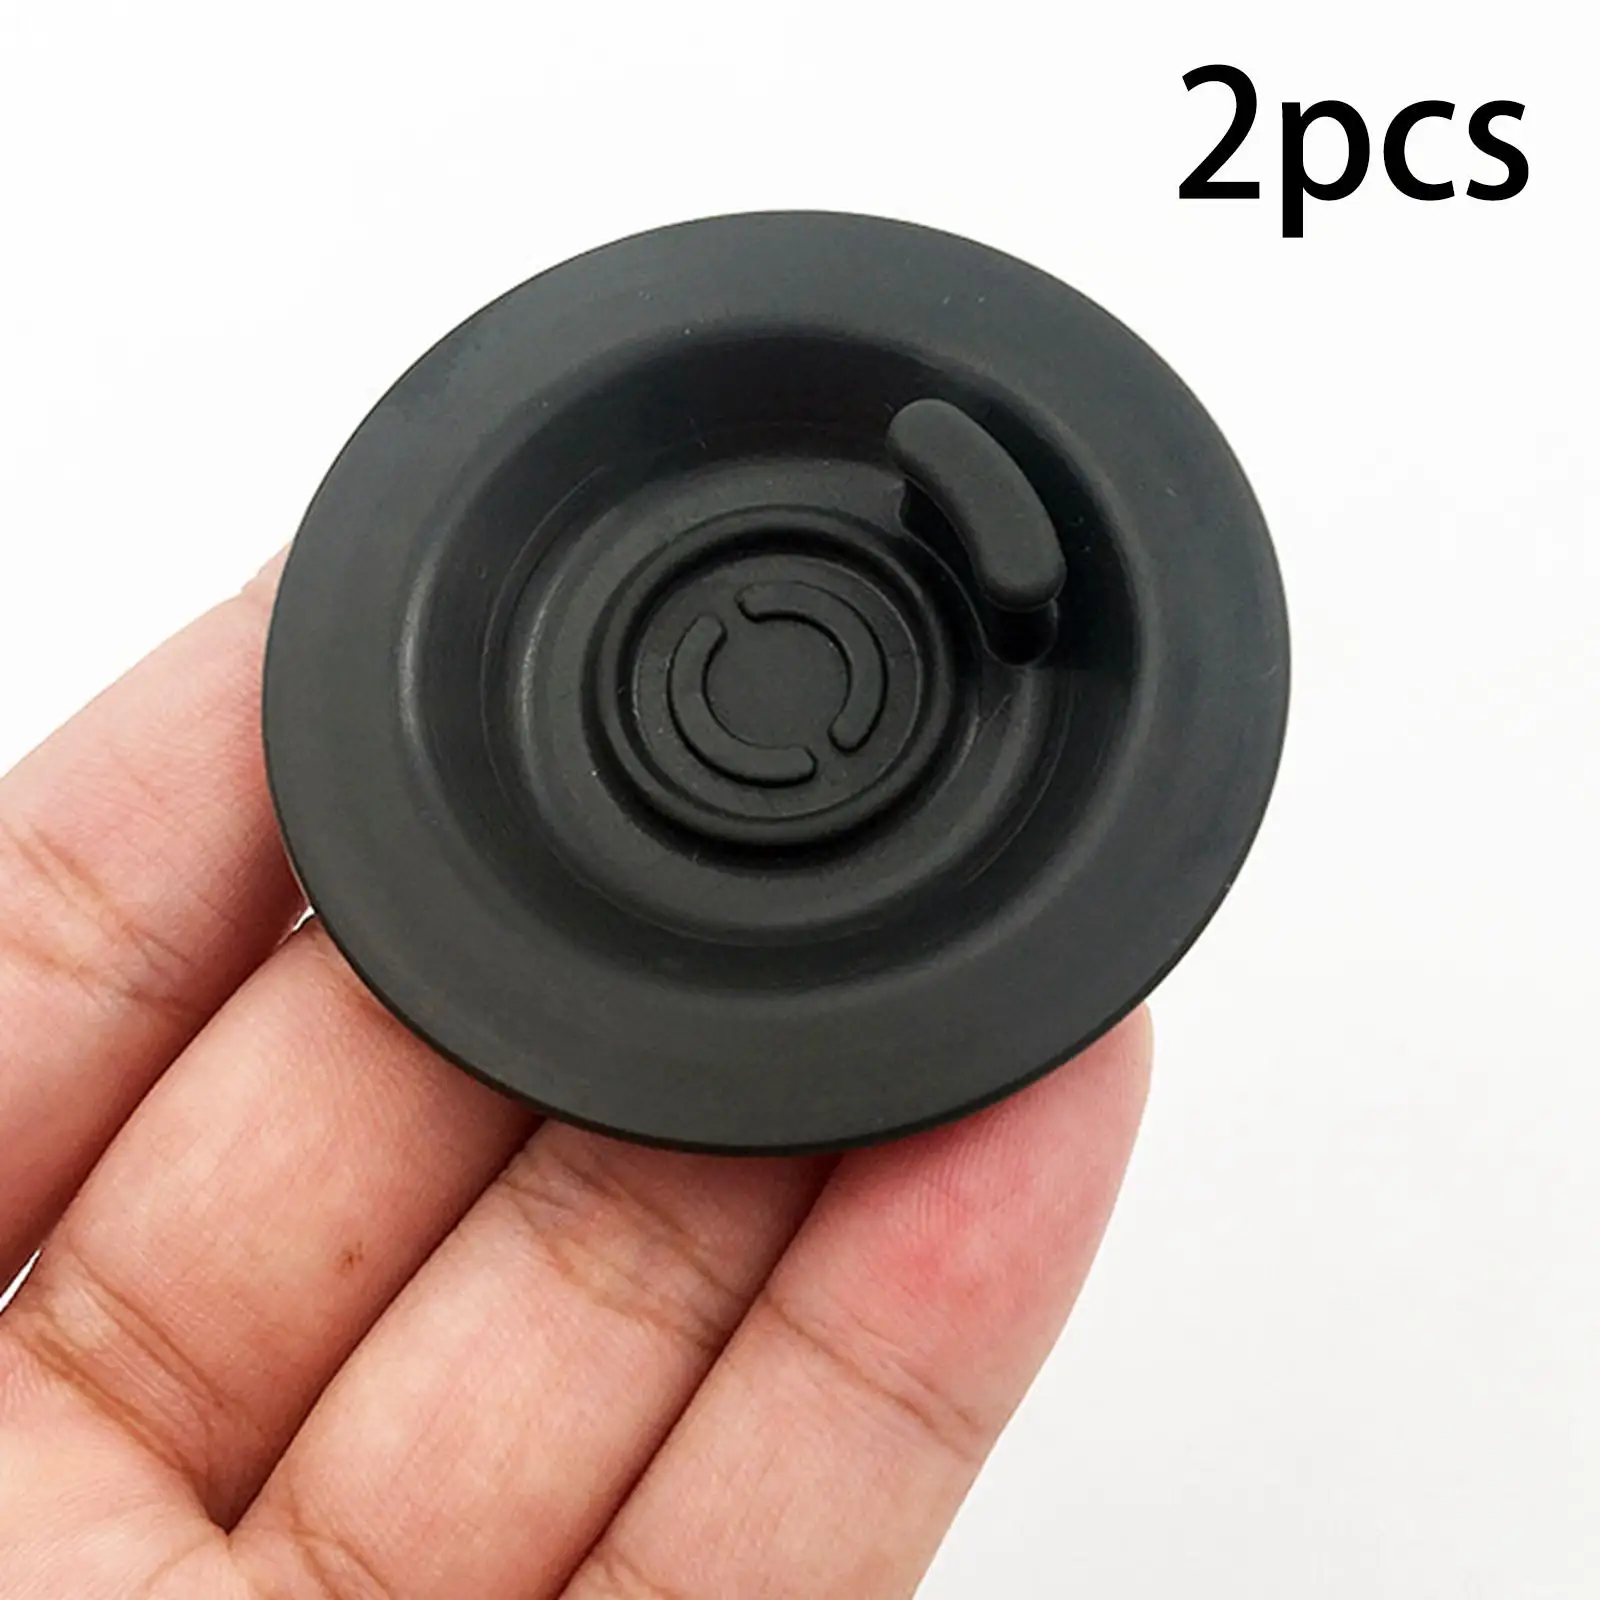 2Pcs 54mm Espresso Cleaning Disc Coffee Machine Accessory Portable Backflush Disc for Bes870XL Bes878bss Bes880 Espresso Machine